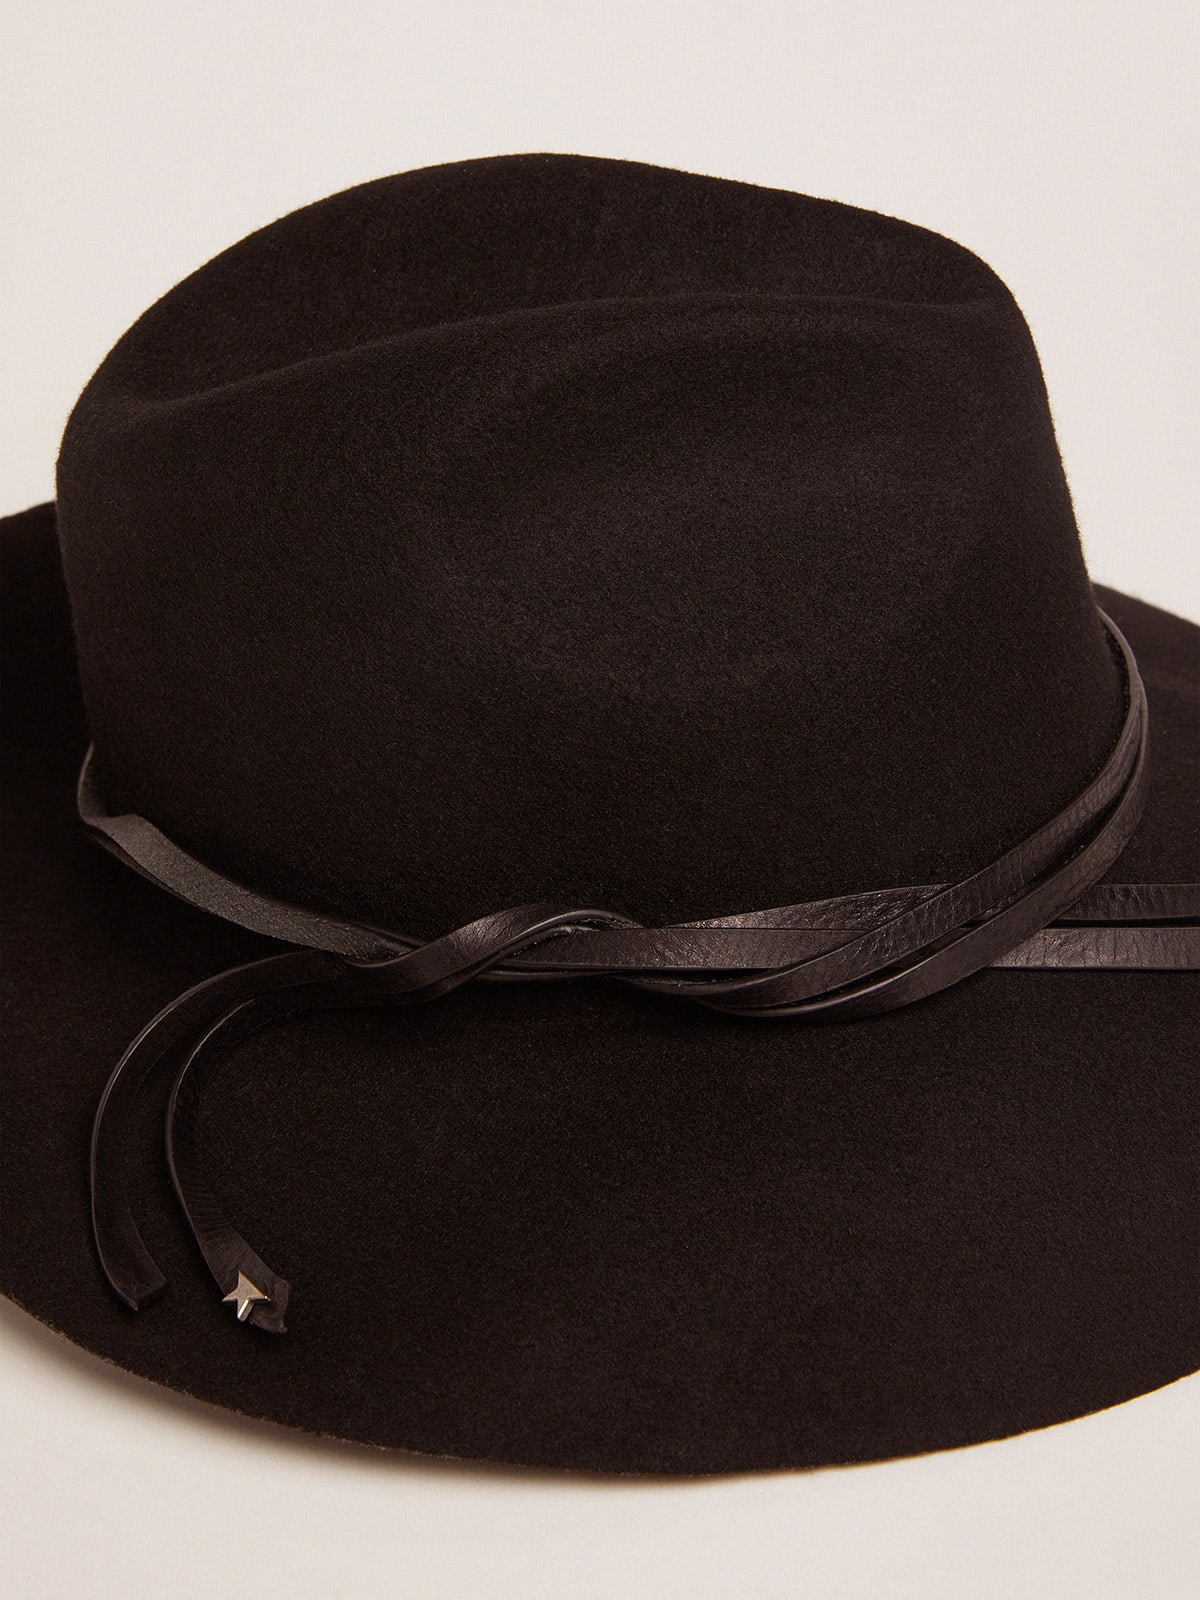 Golden Goose - Black hat with leather strap in 